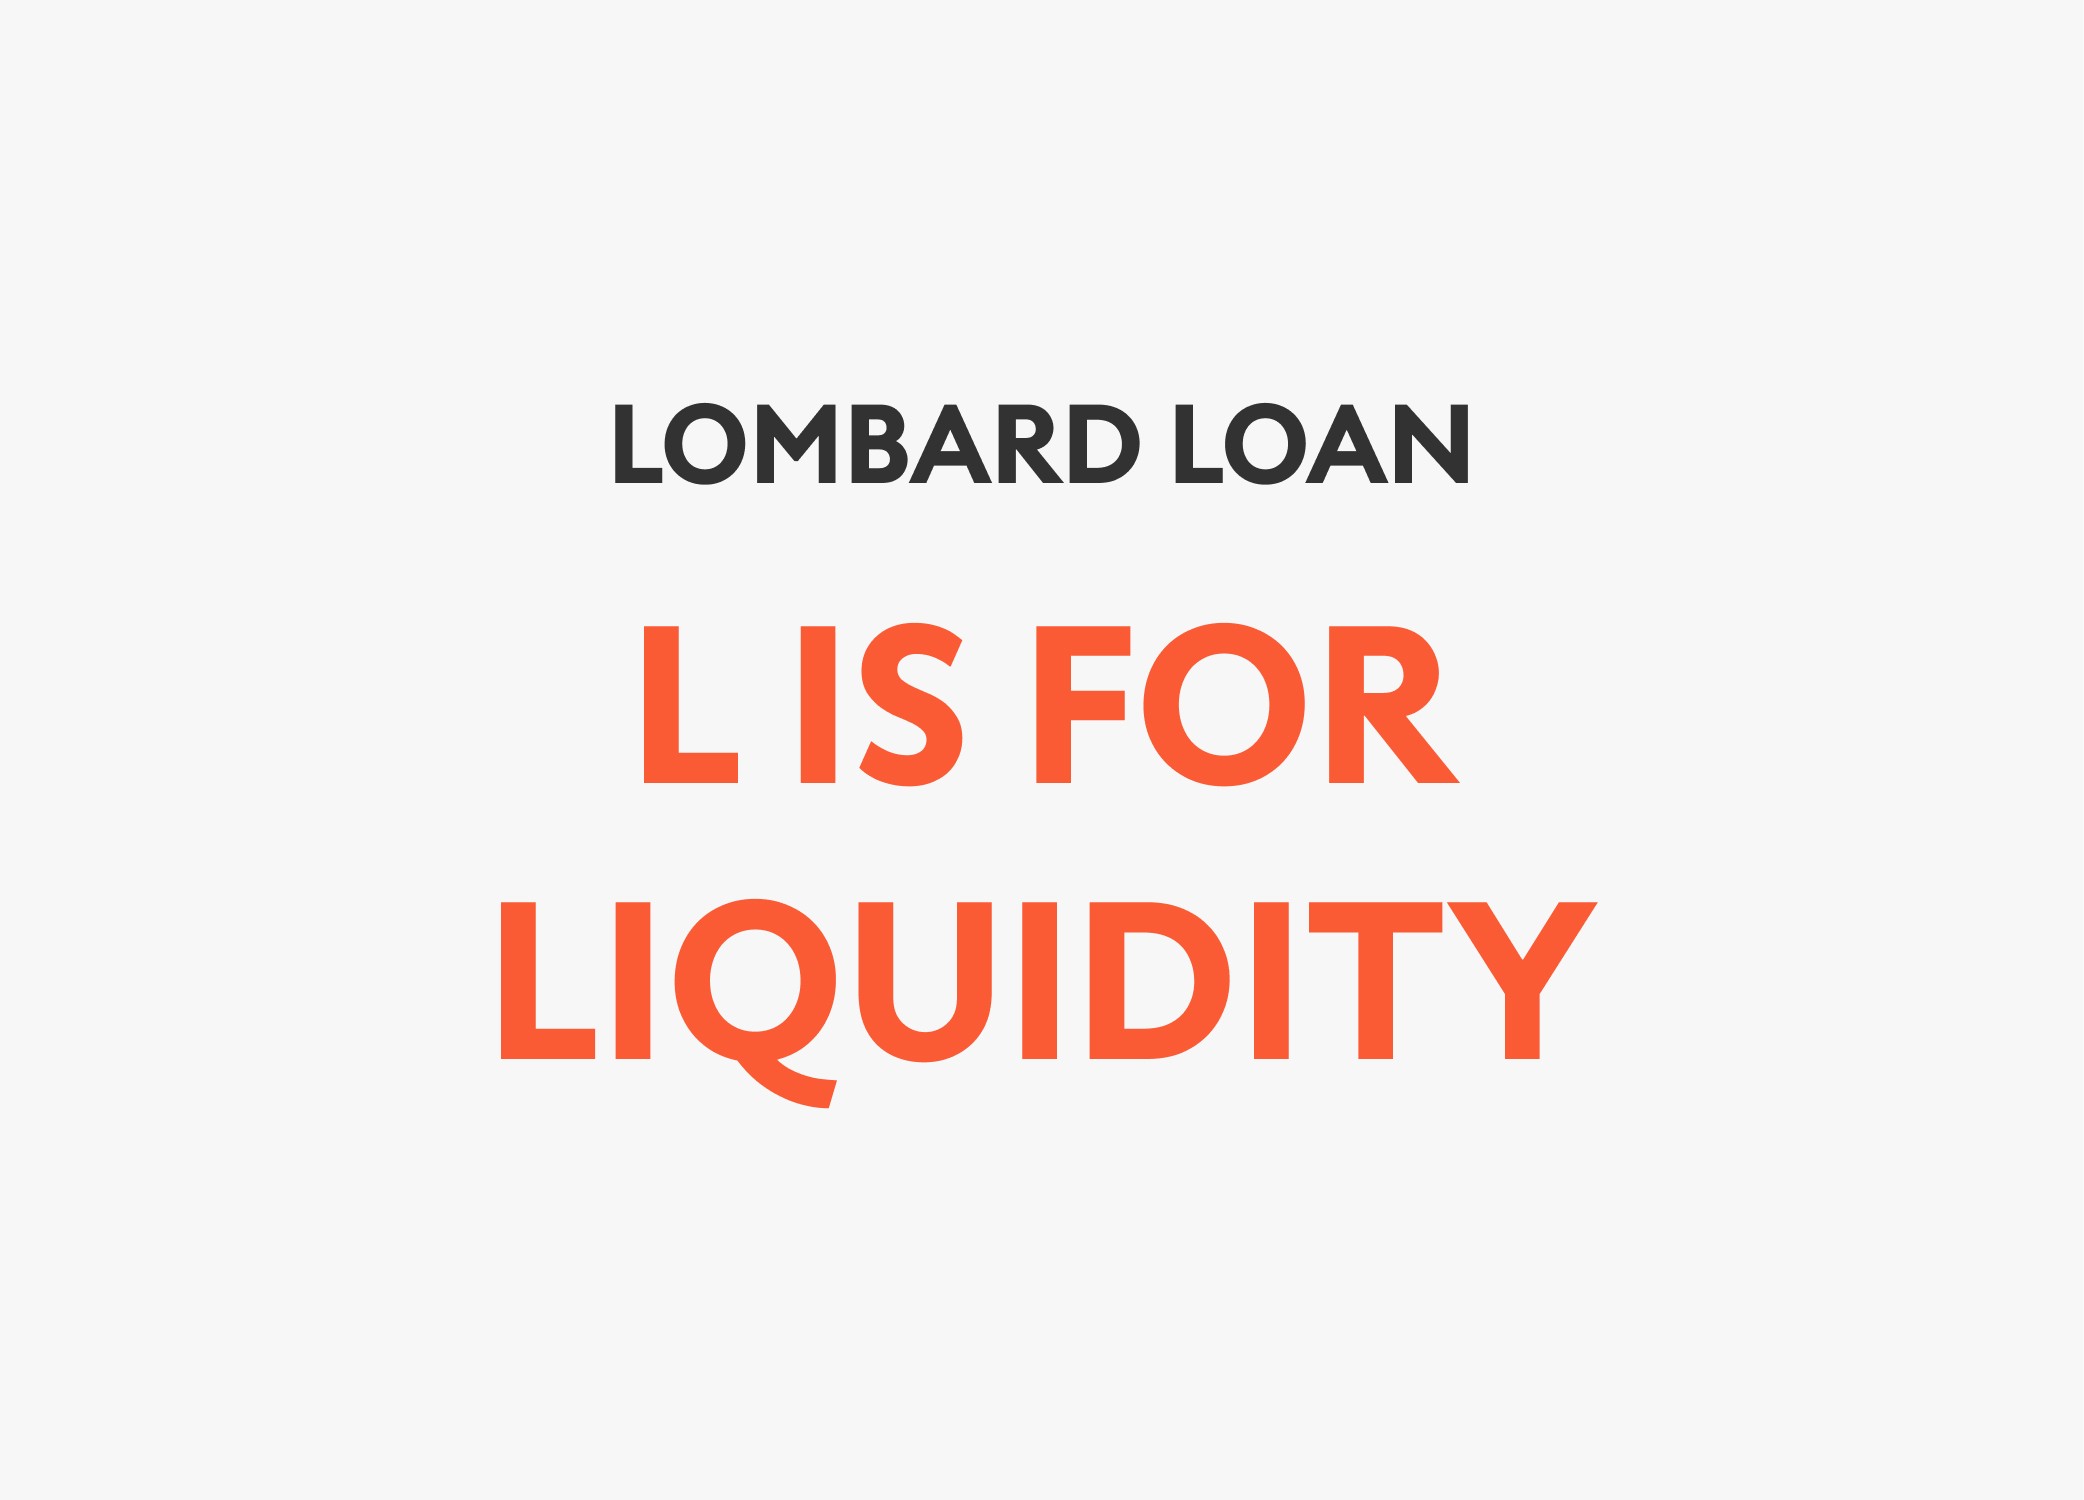 Lombard Loan - L is for liquidity